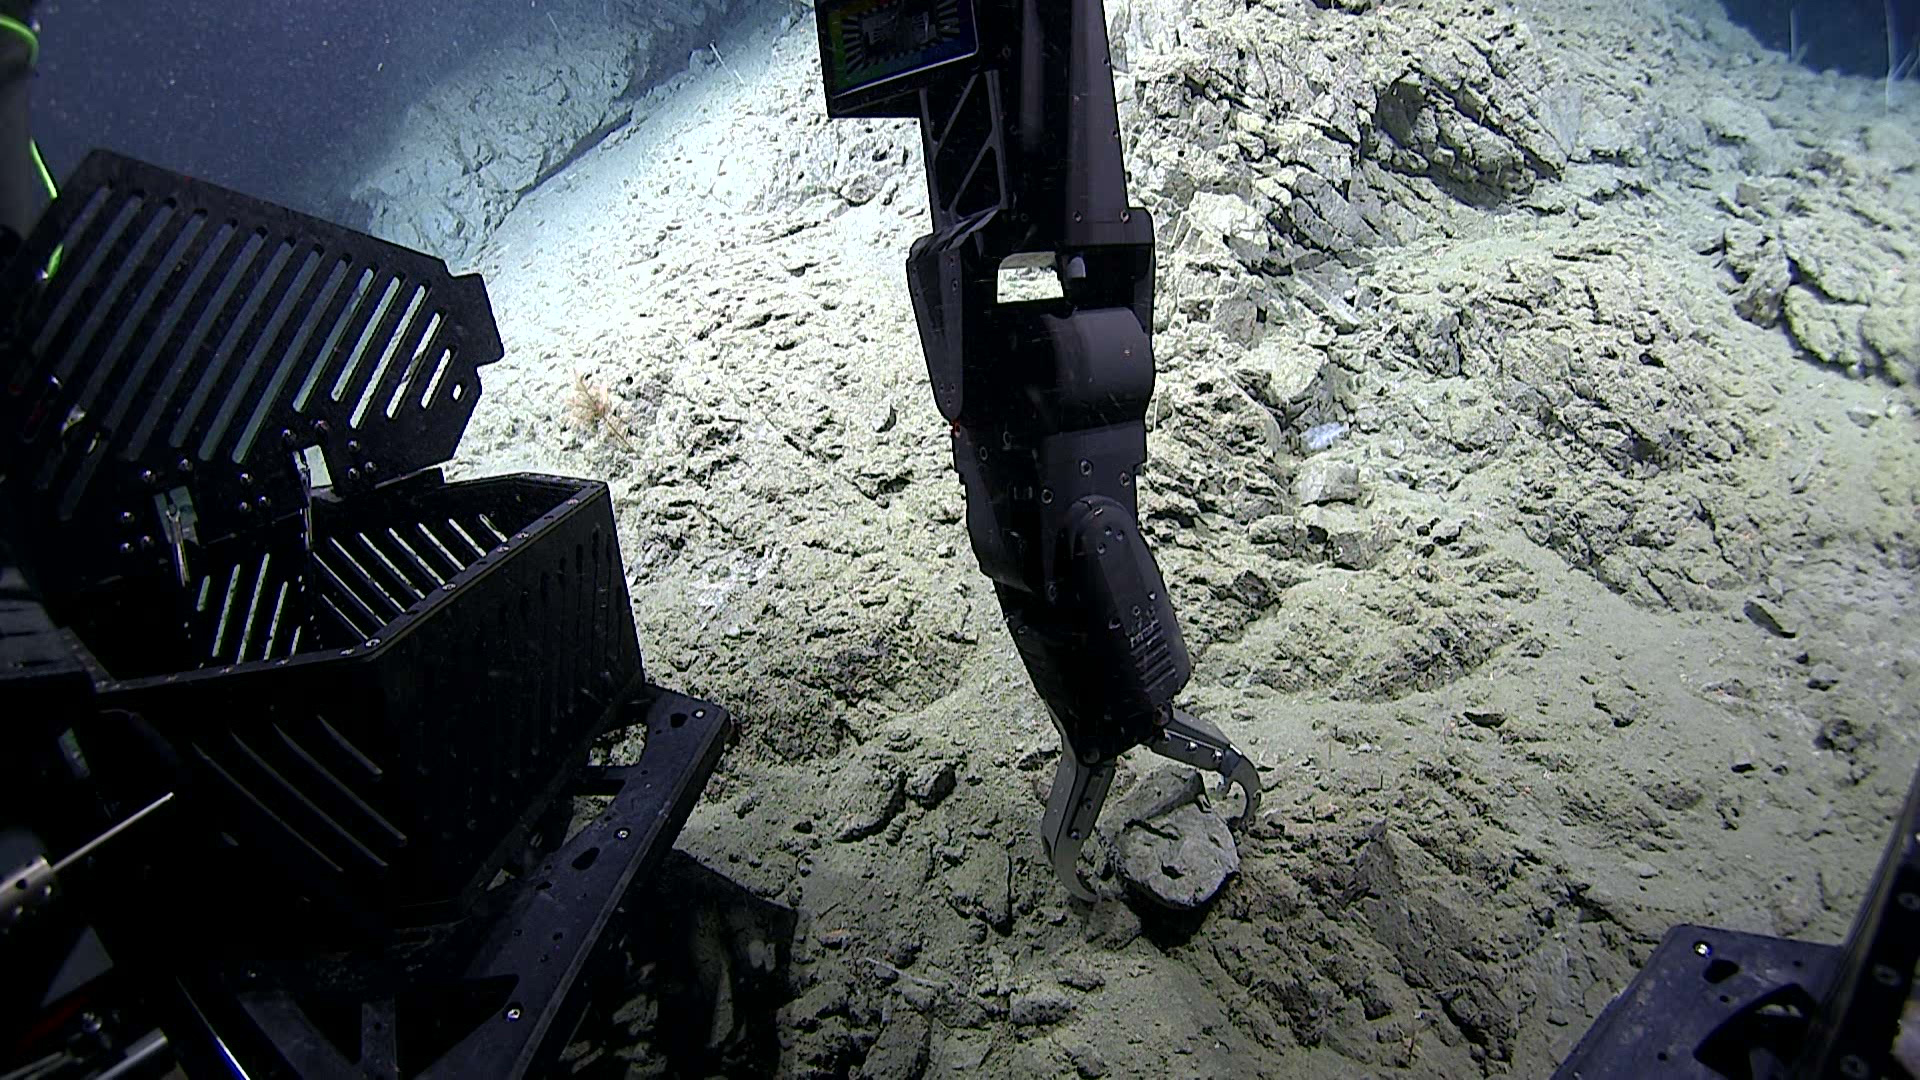 The arm of remotely operated vehicle Deep Discoverer samples fractured, well-cemented mudstone near the top of the transect at the second dive site of the Seascape Alaska 3 expedition.